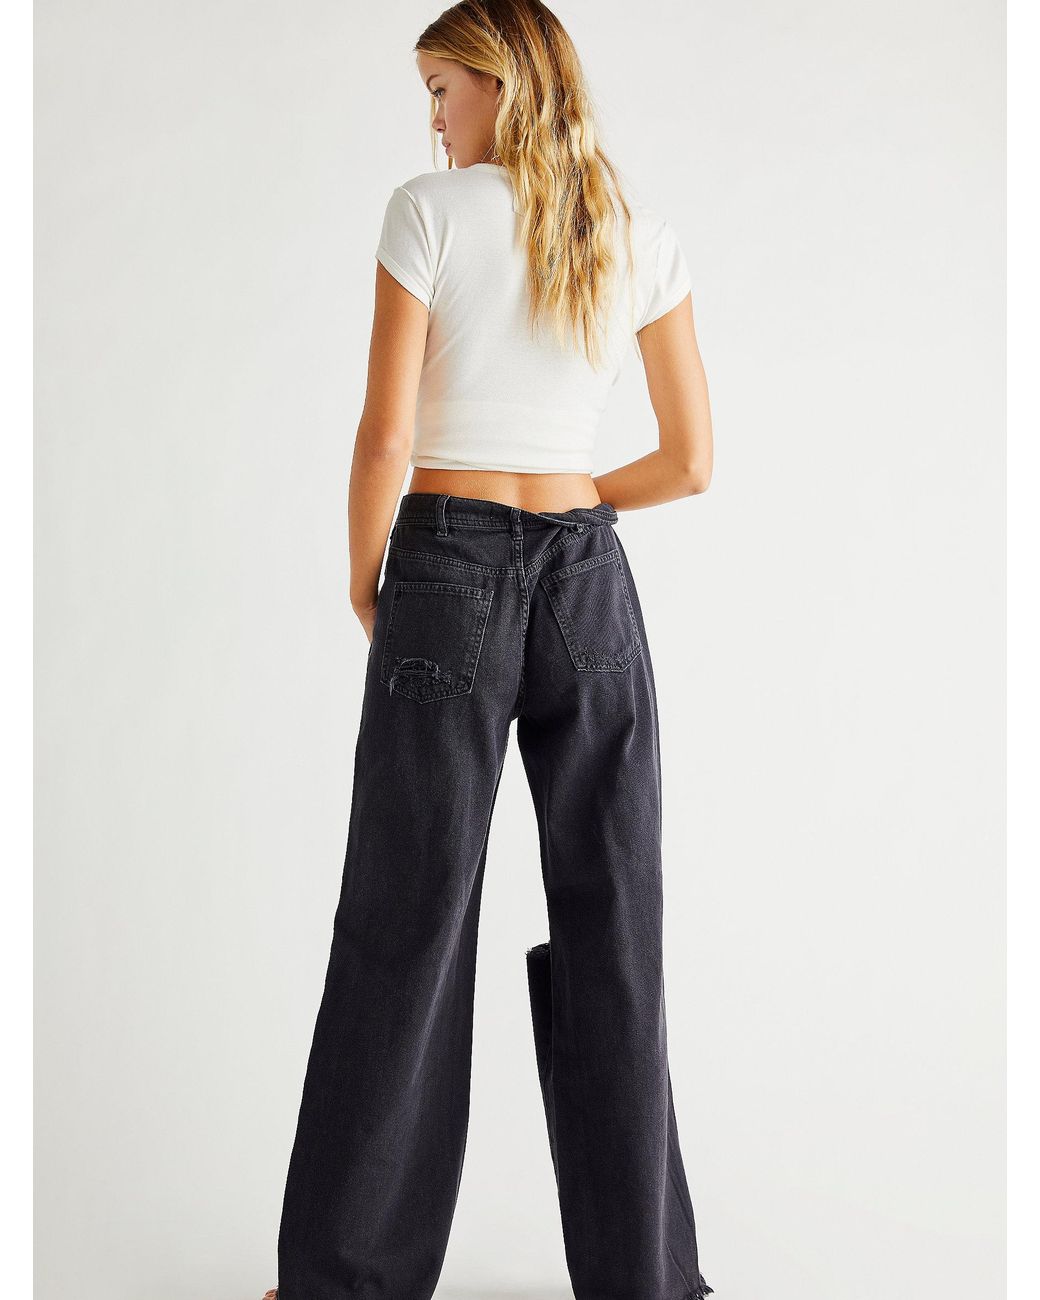 Free People Ollie Extreme Wide Leg Jeans in Black | Lyst